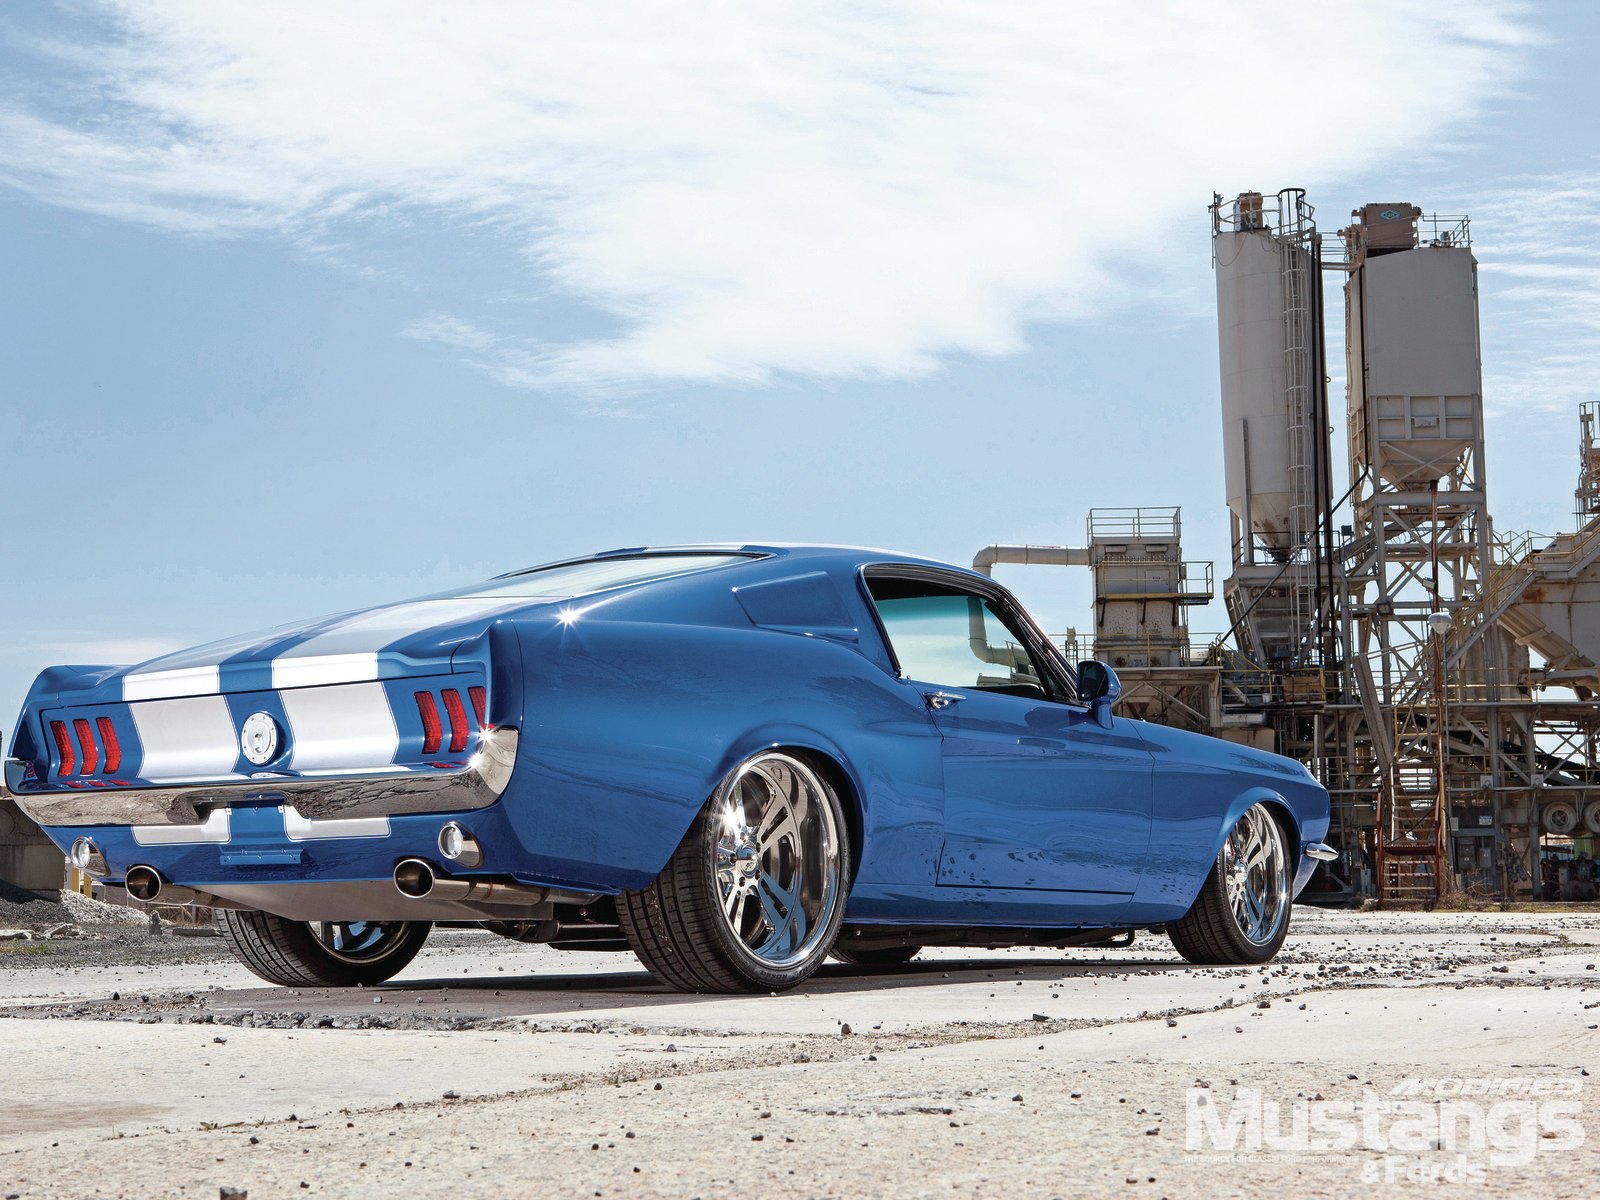 1967, Ford, Mustang, Gt, Fastback, Streetrod, Street, Rod, Hot, Rodeder, Muscle, Super, Low, Tunning, Usa, 1600x1200 01 Wallpaper